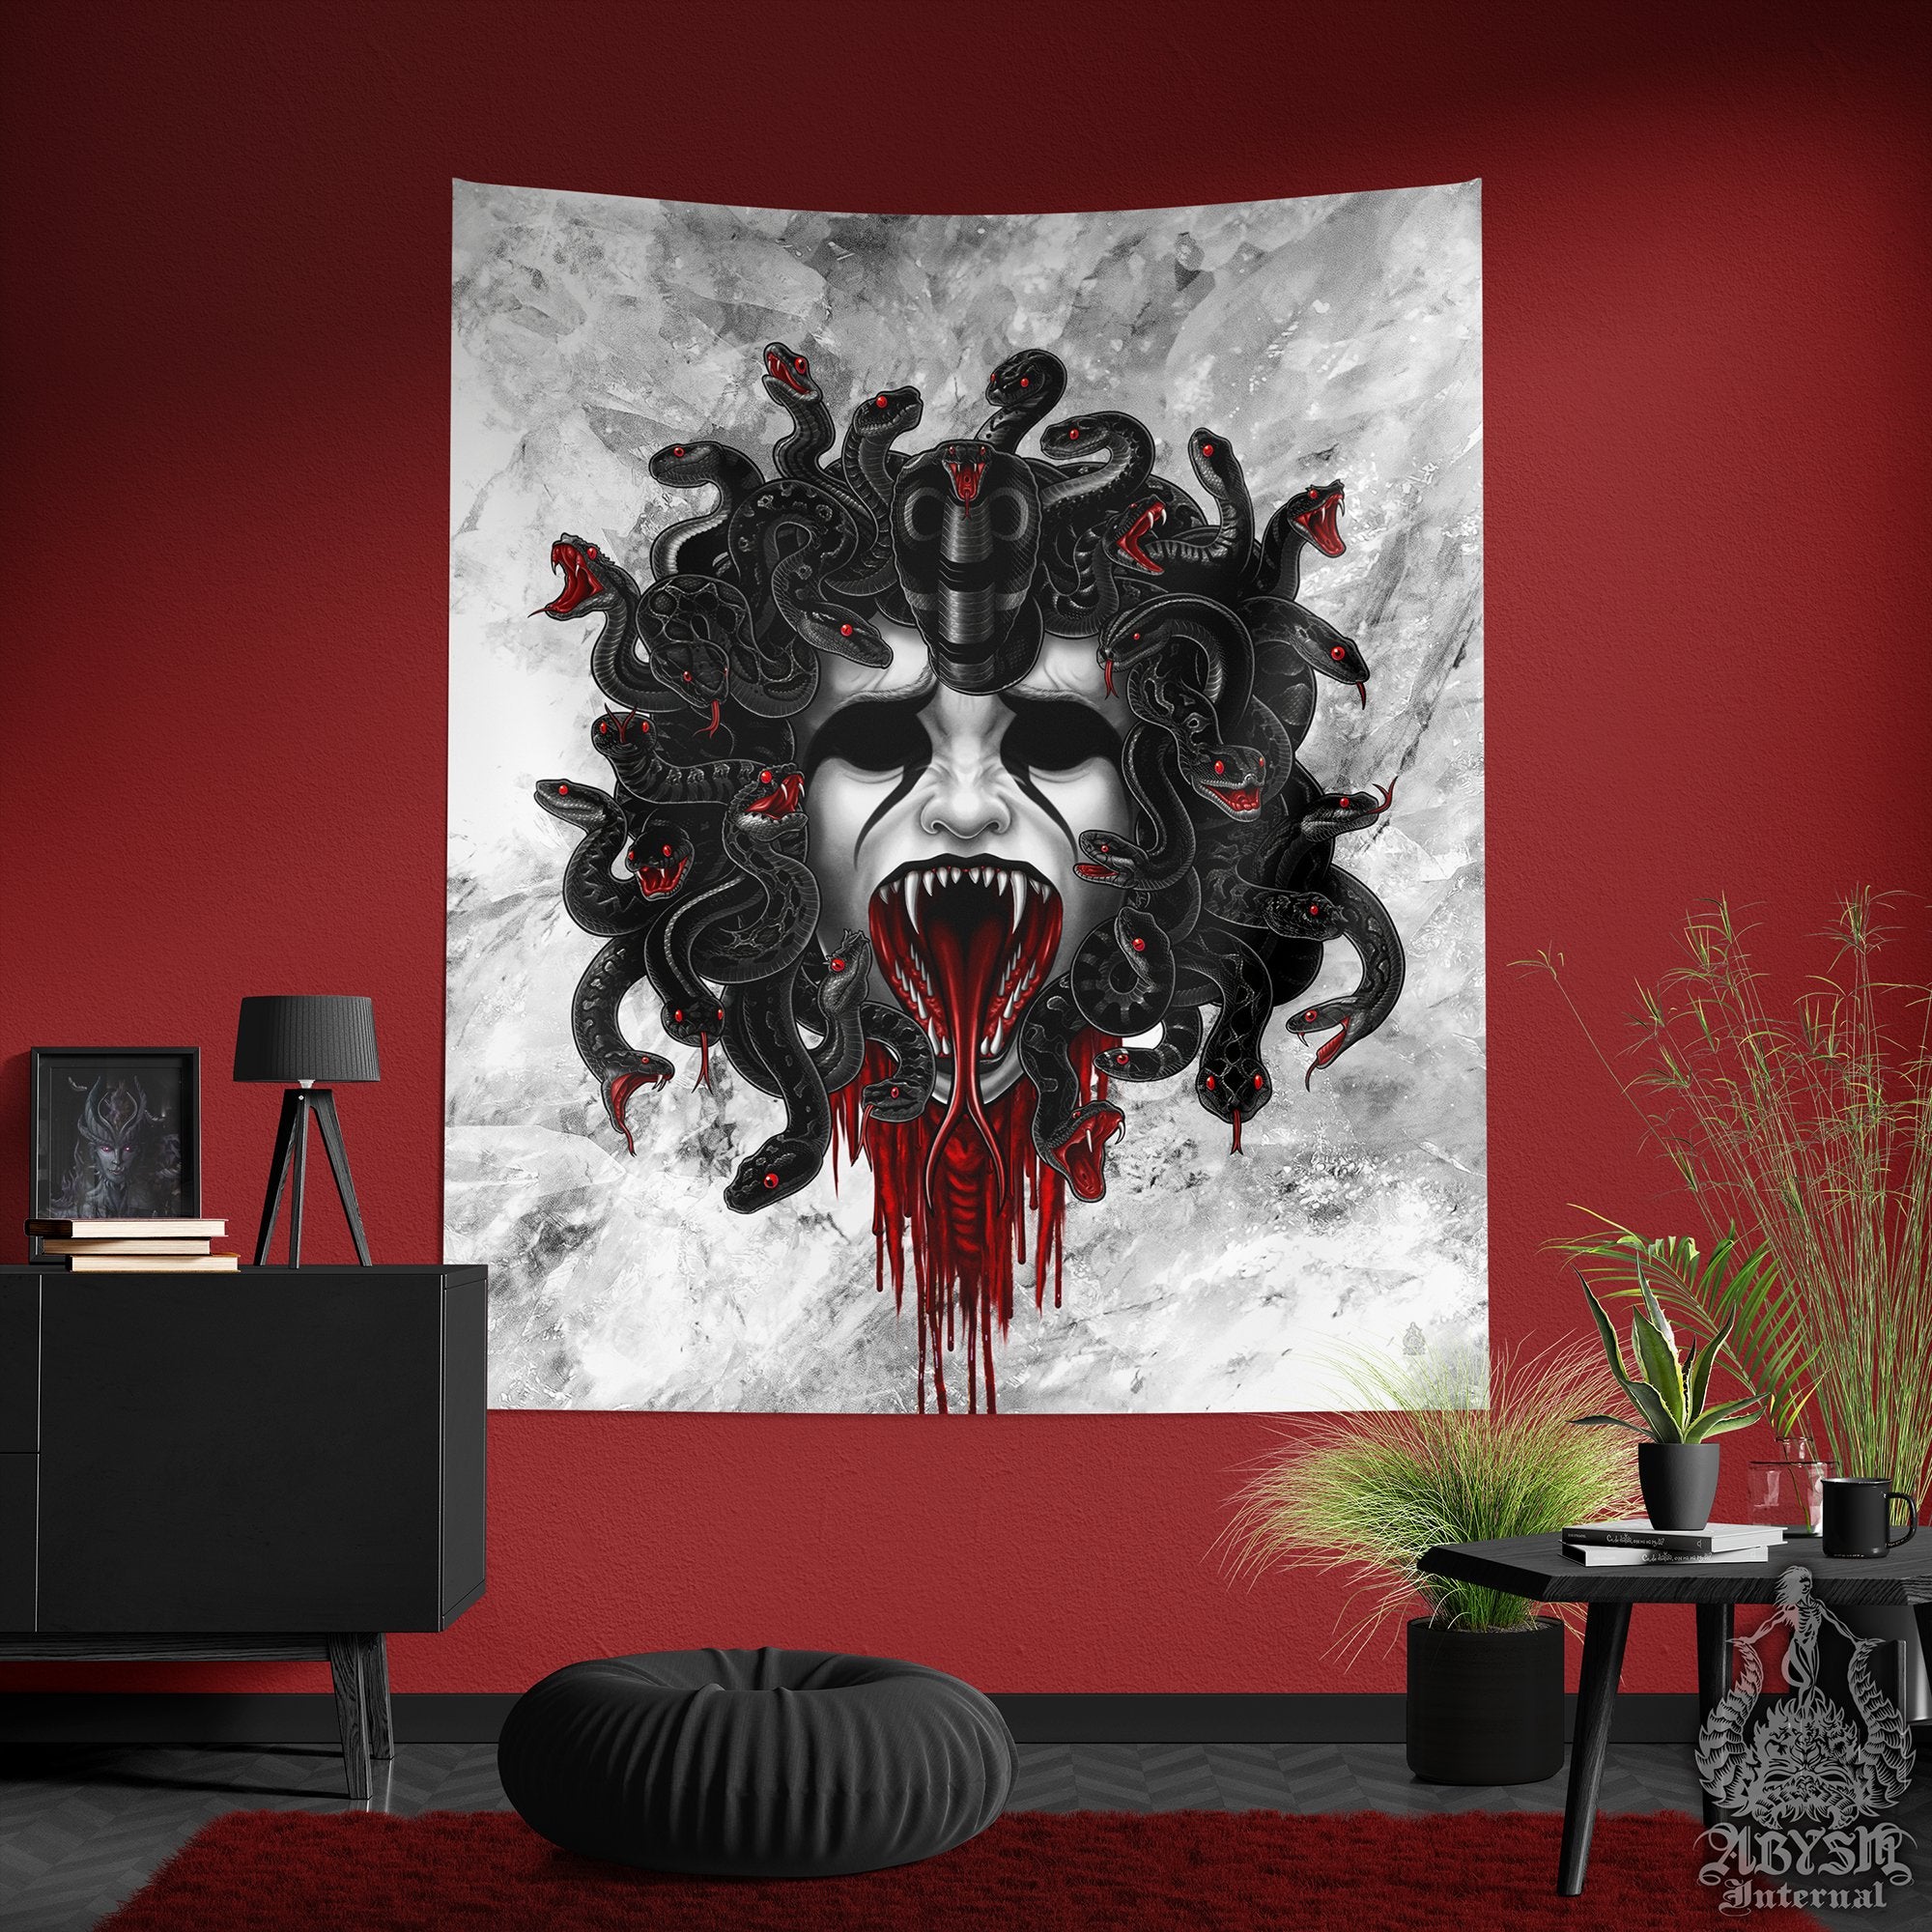 White Goth Tapestry, Medusa & Skull Wall Hanging, Gohic Home Decor, Vertical Art Print - 2 Faces, 3 Colors - Abysm Internal